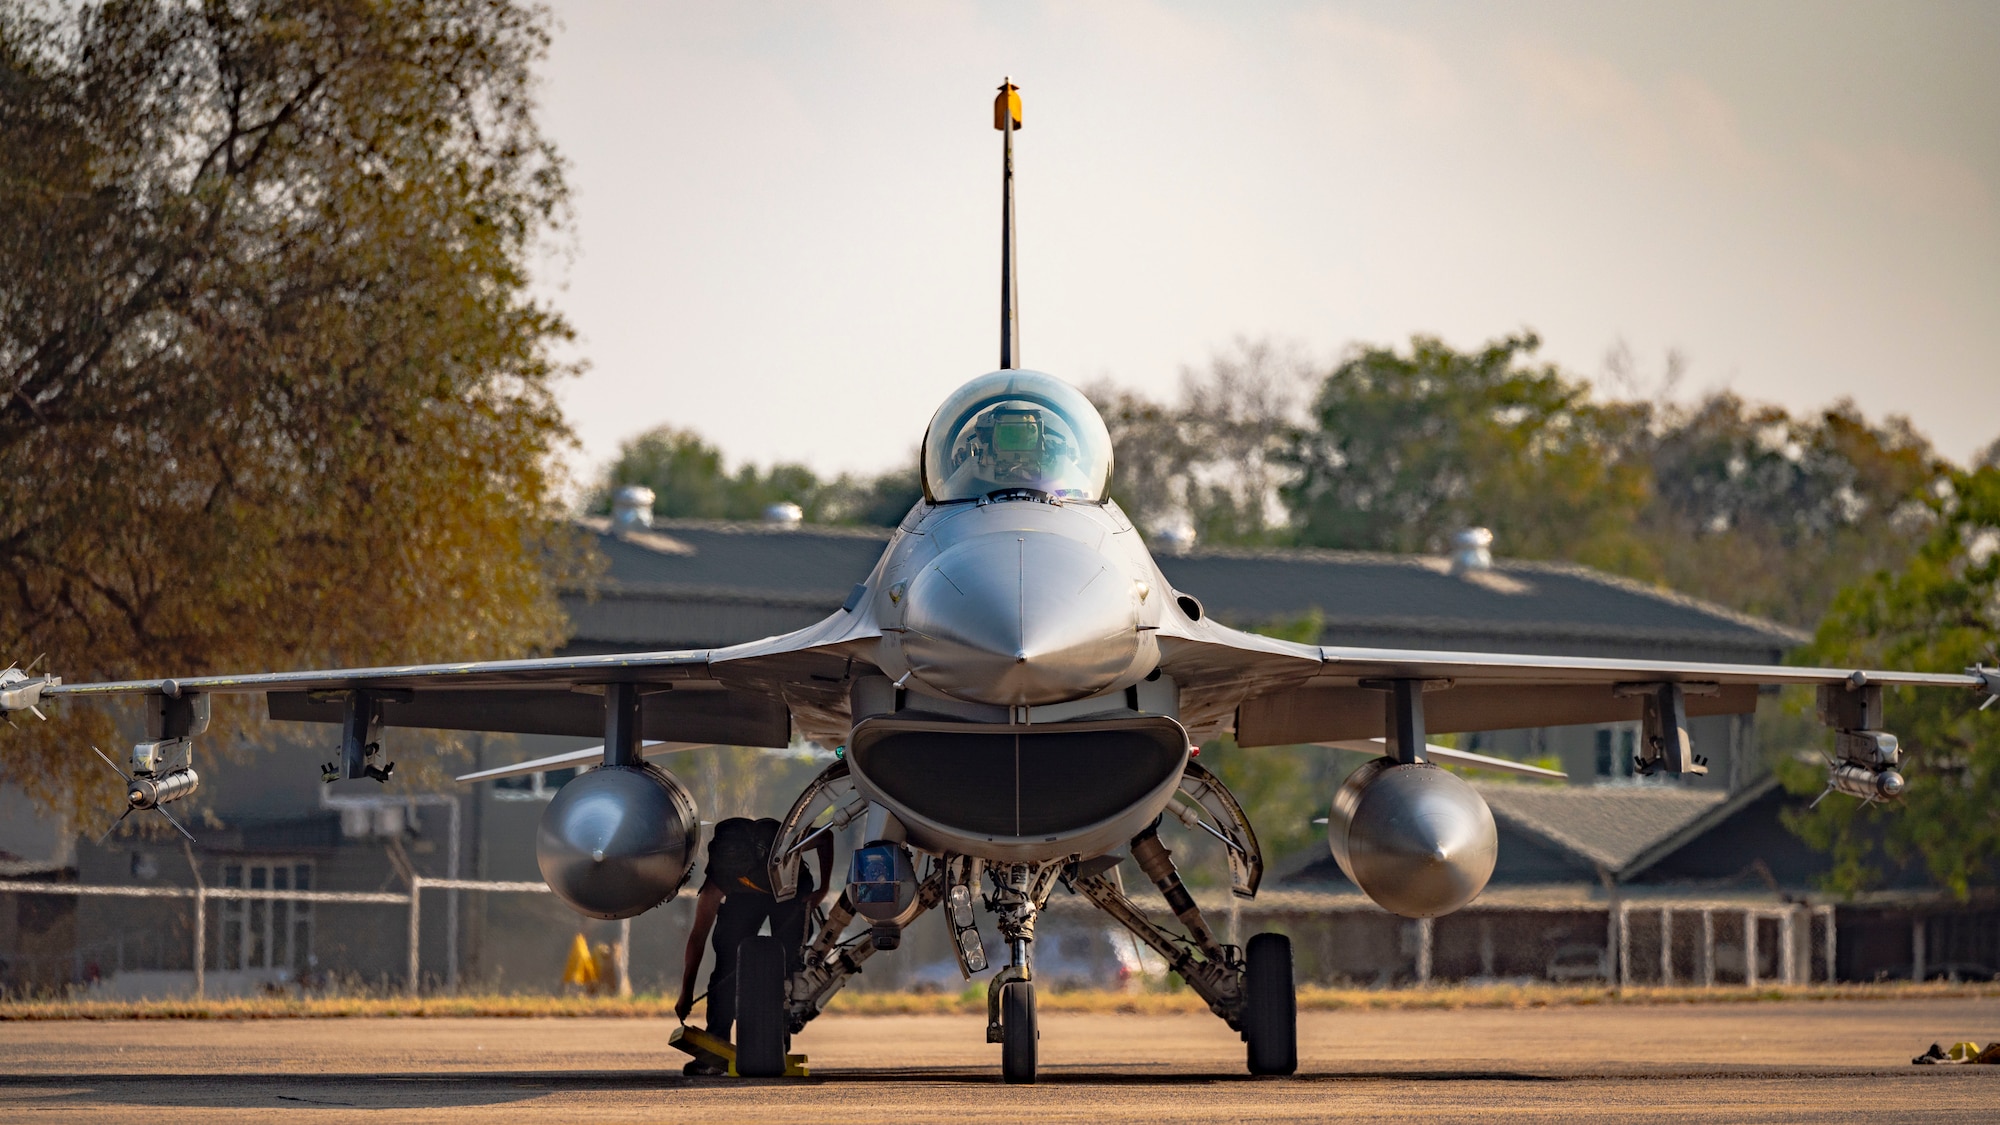 F-16 Fighting Falcon pilot, parks an F-16 upon return from participating in a maritime strike exercise scenario